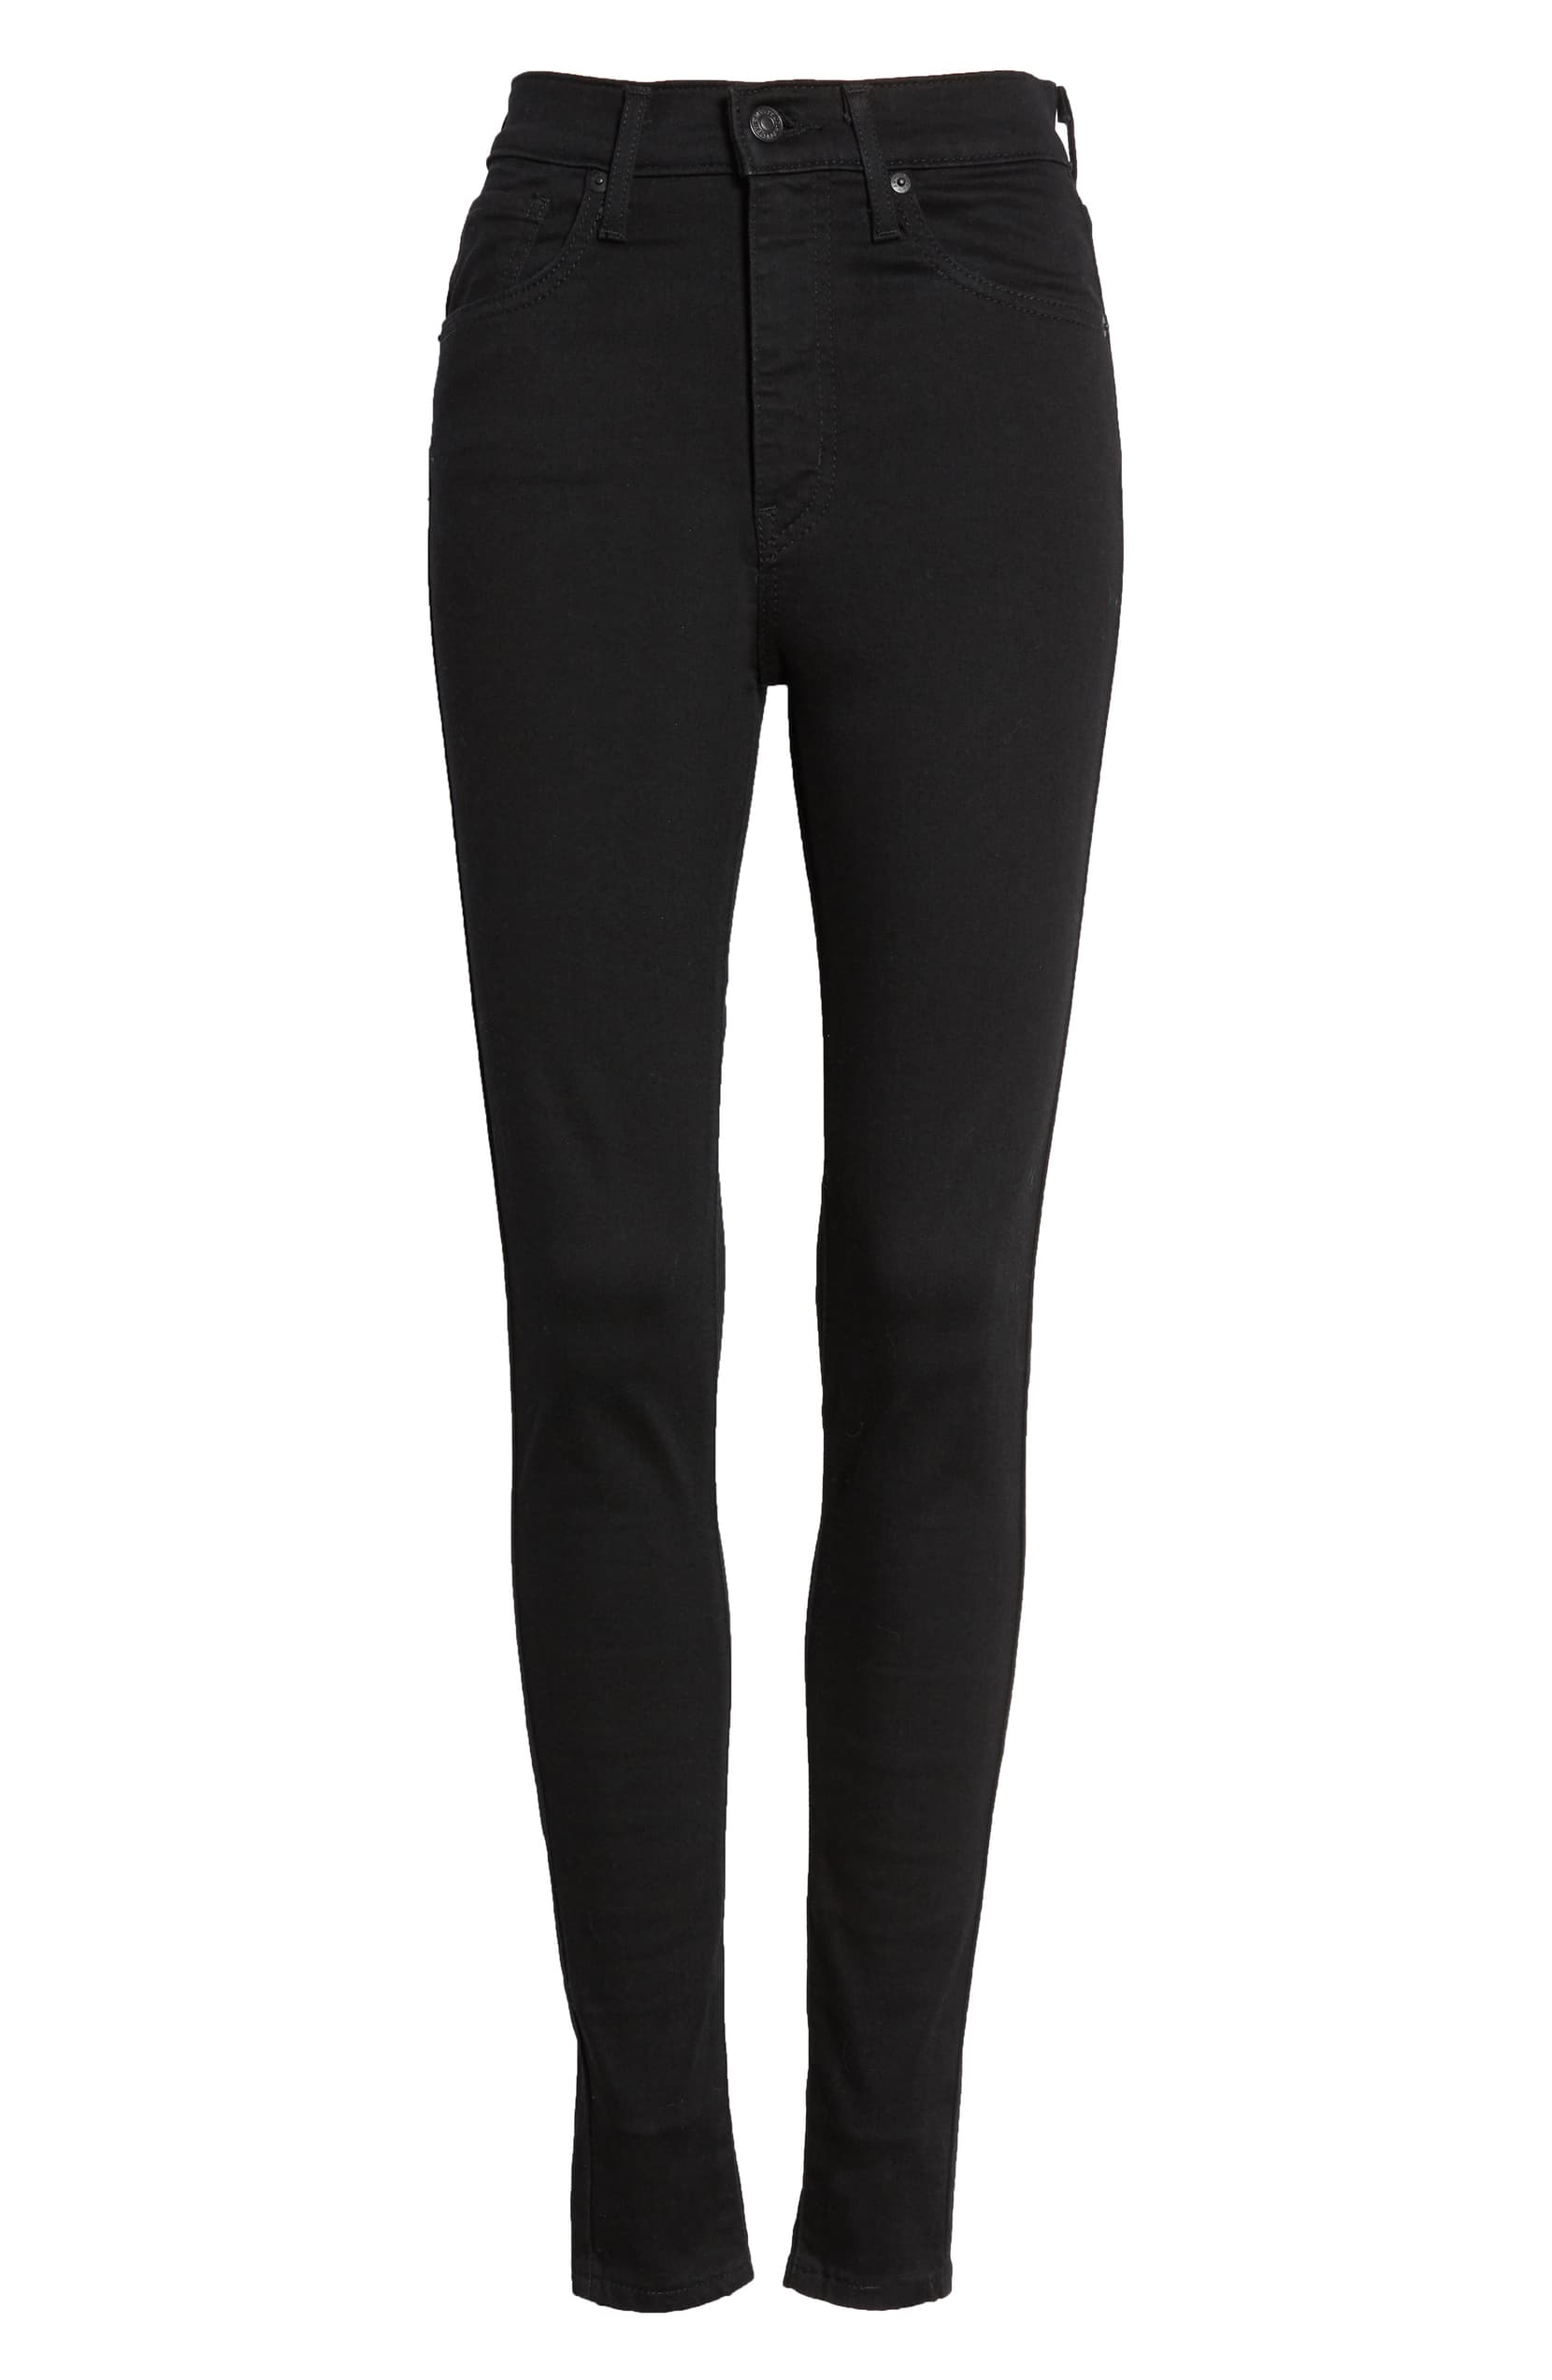 levis high waisted black skinny jeans